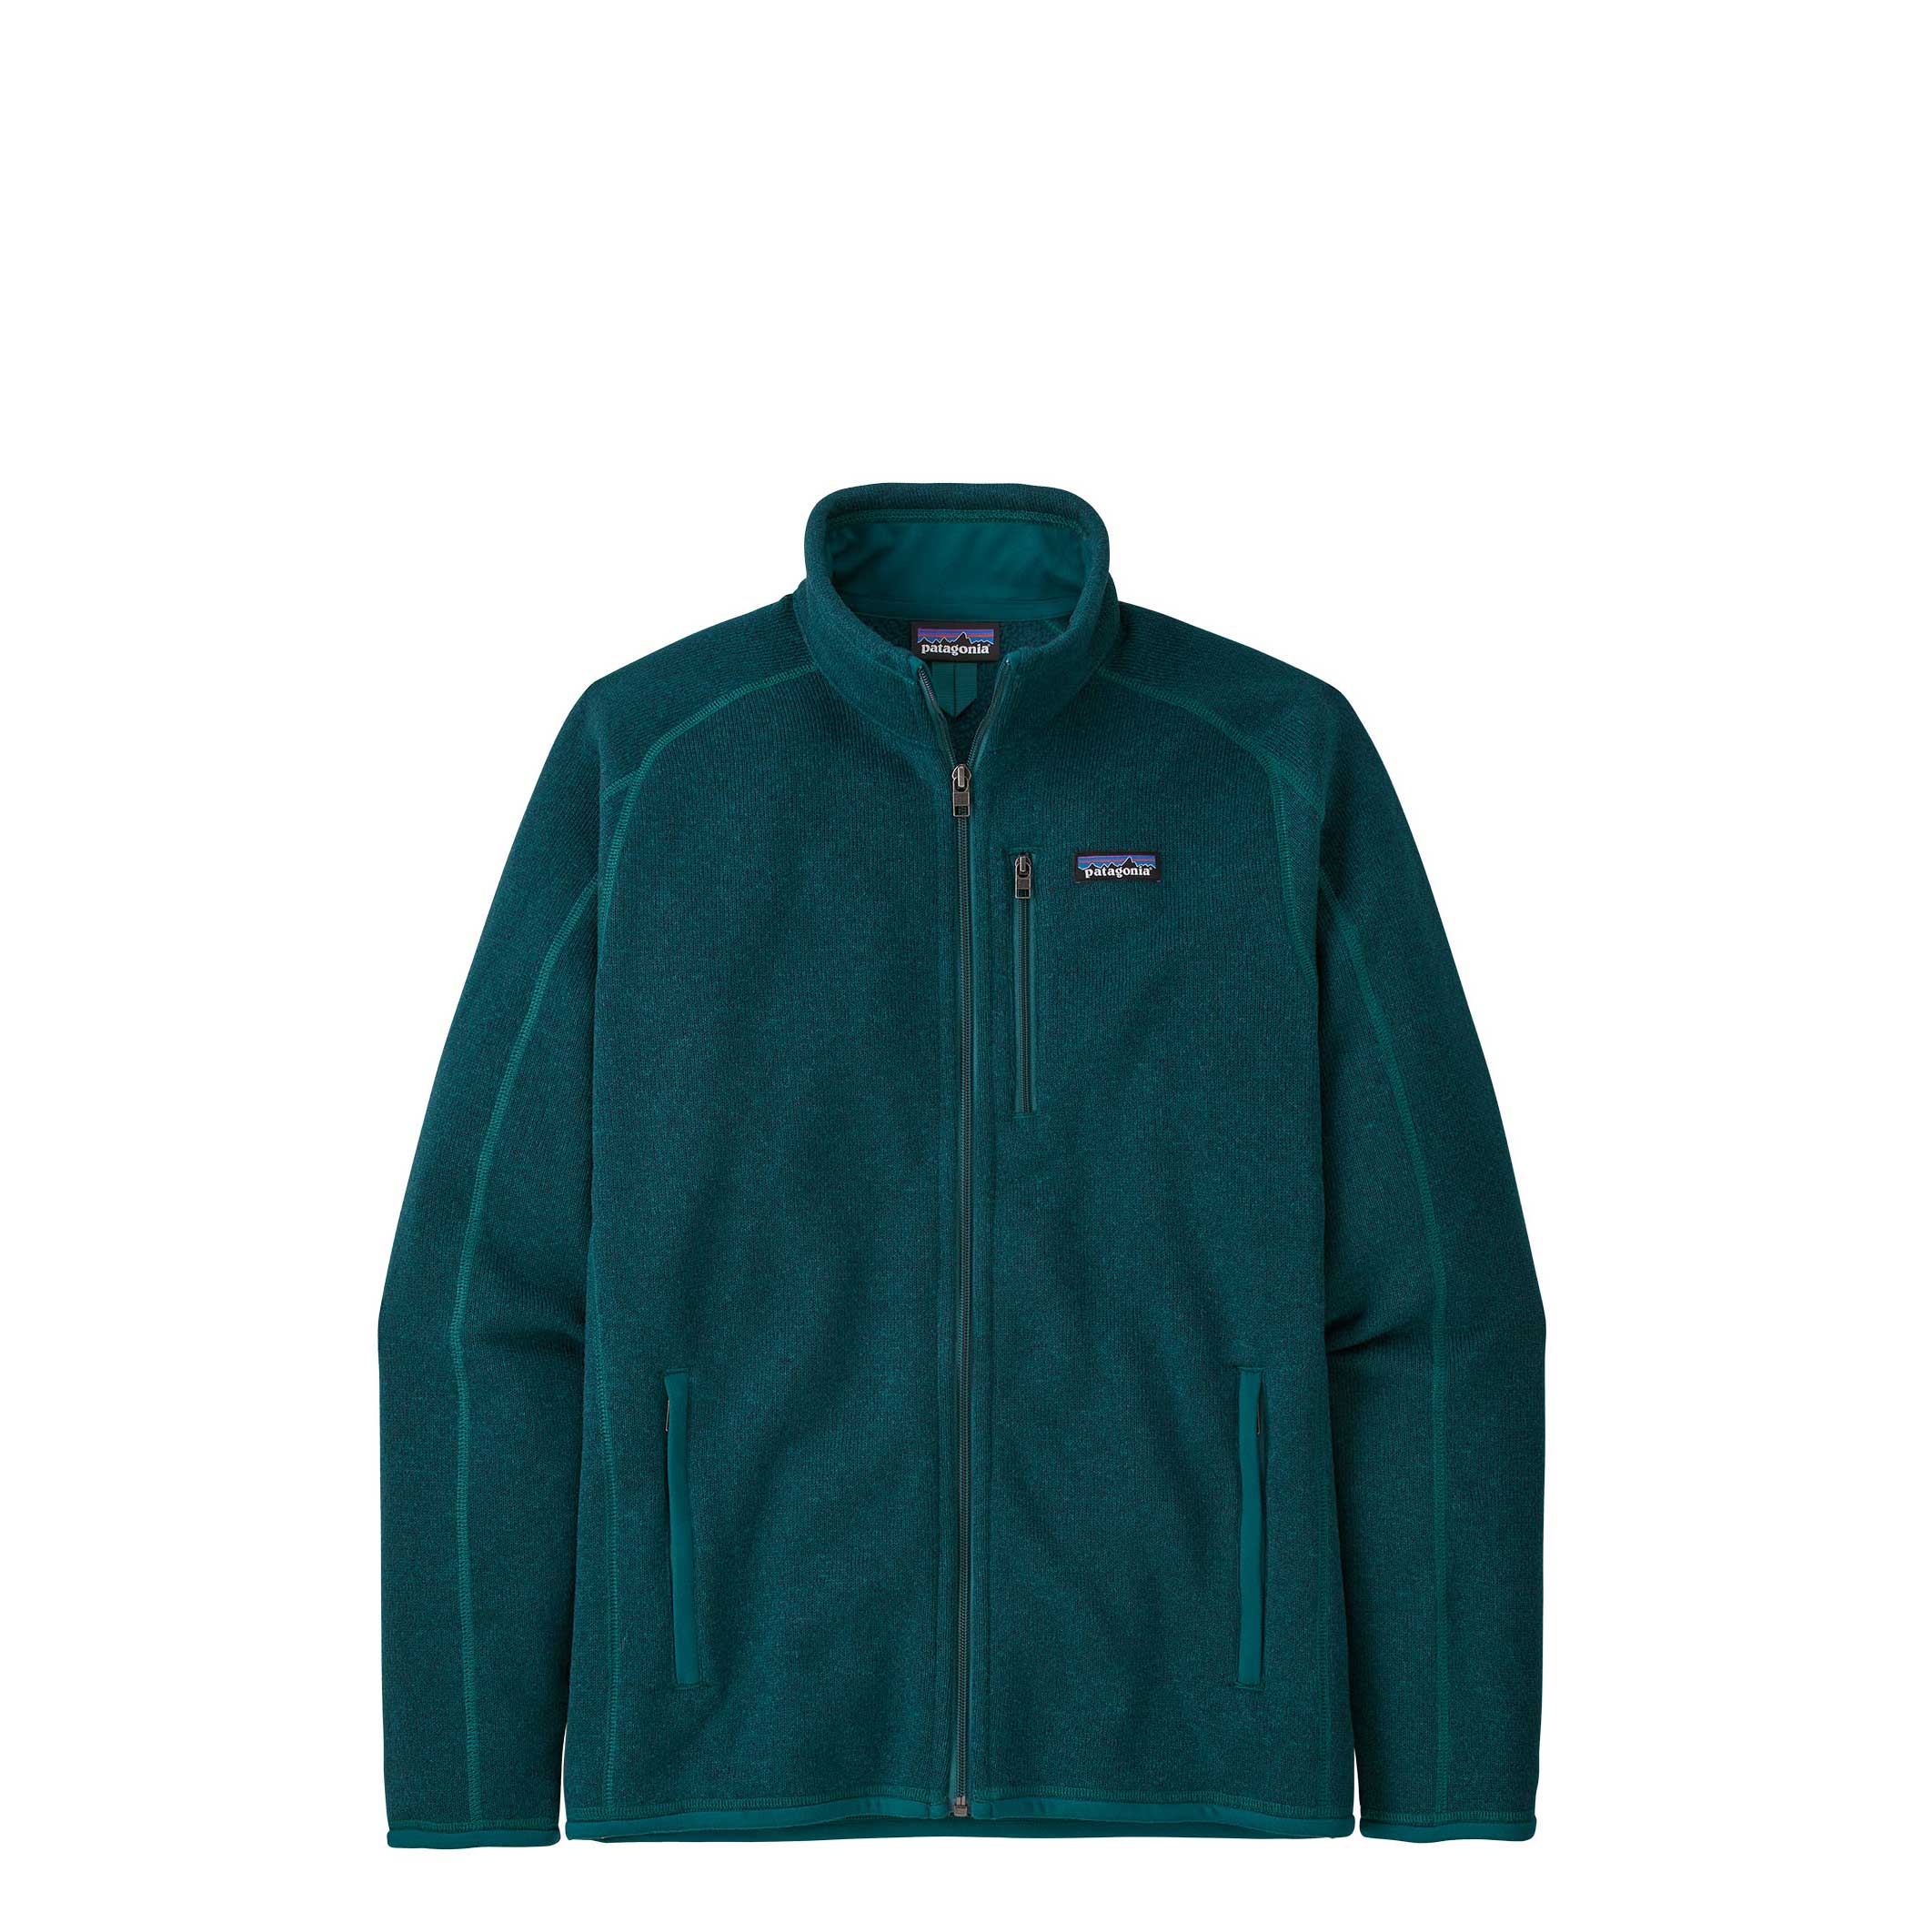 Patagonia - Better Sweater Jacket (Nouveau Green)